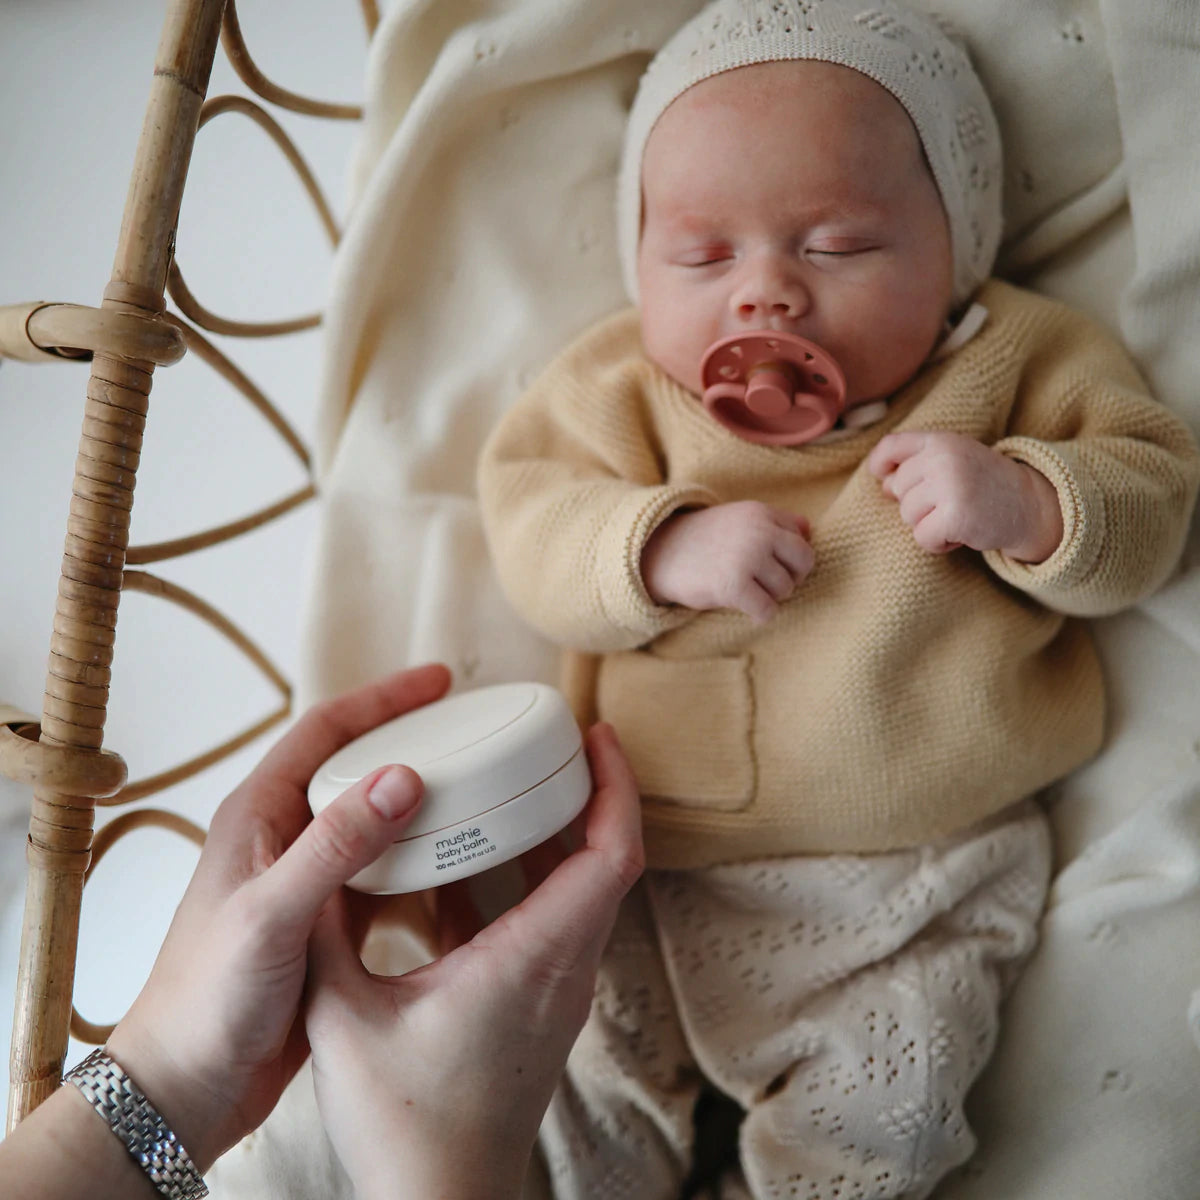 FRIGG | Moon Phase Natural Rubber (Latex) Pacifier